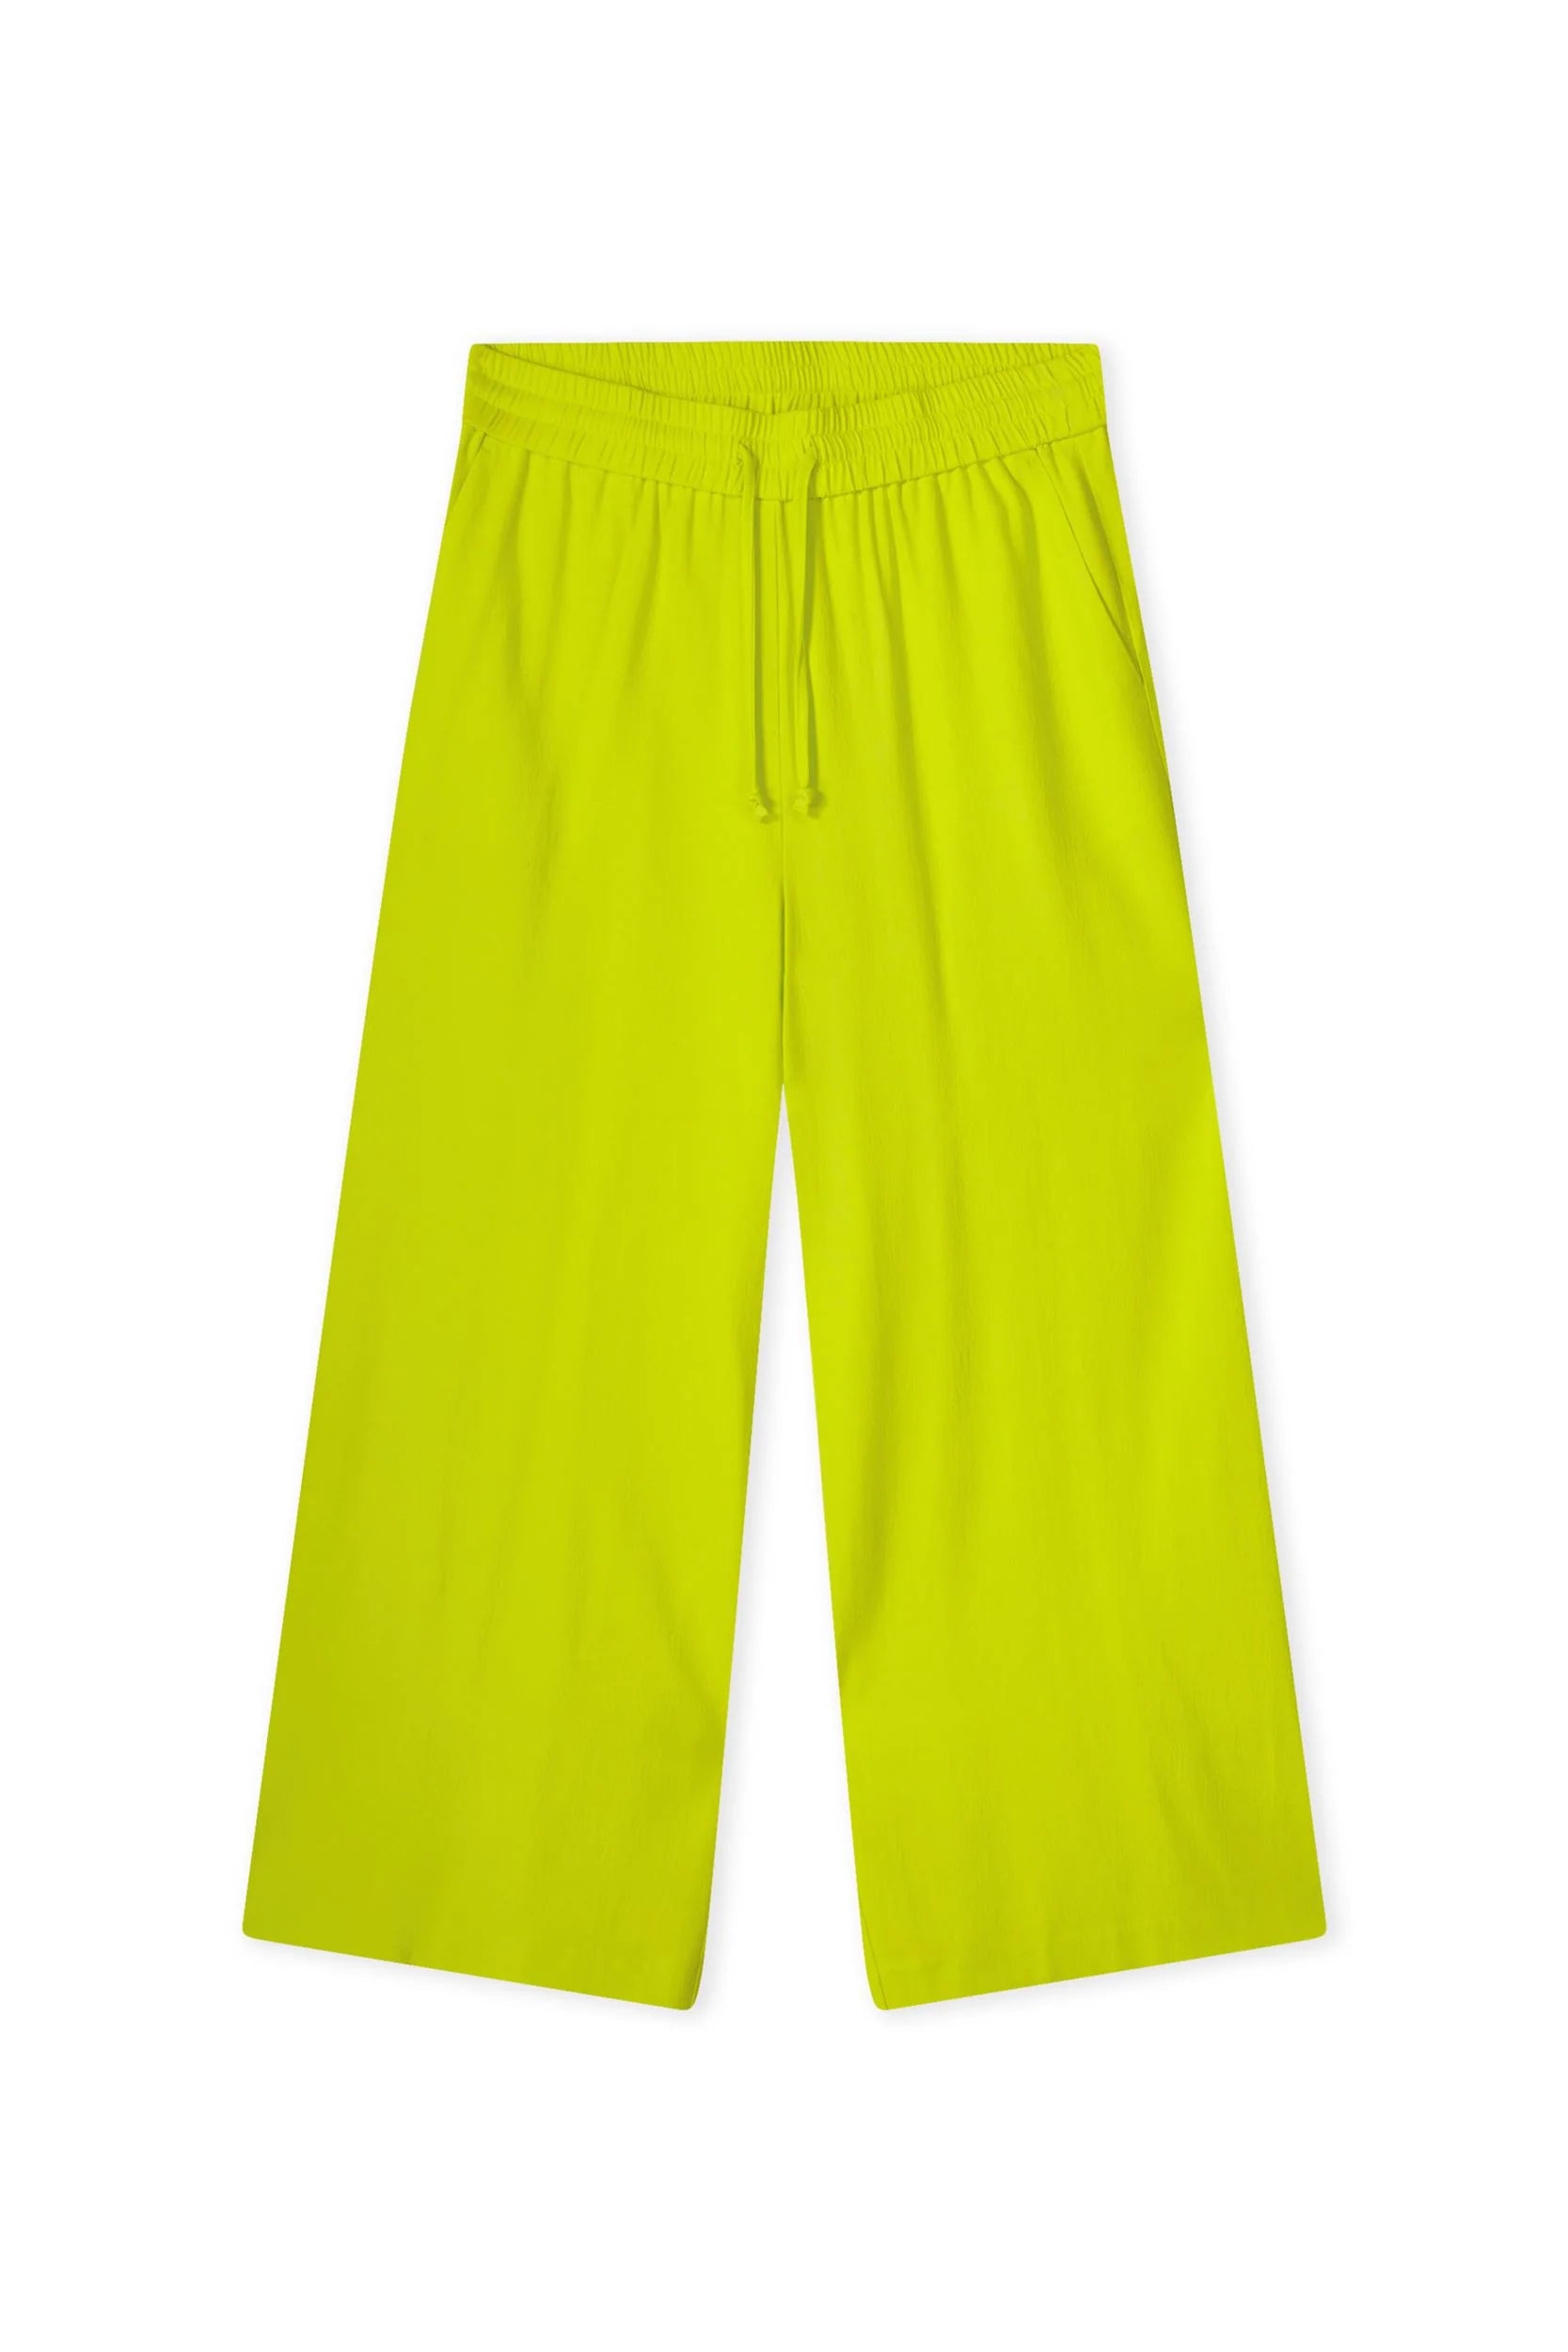 KYRA Louisa Culottes Cyber Lime